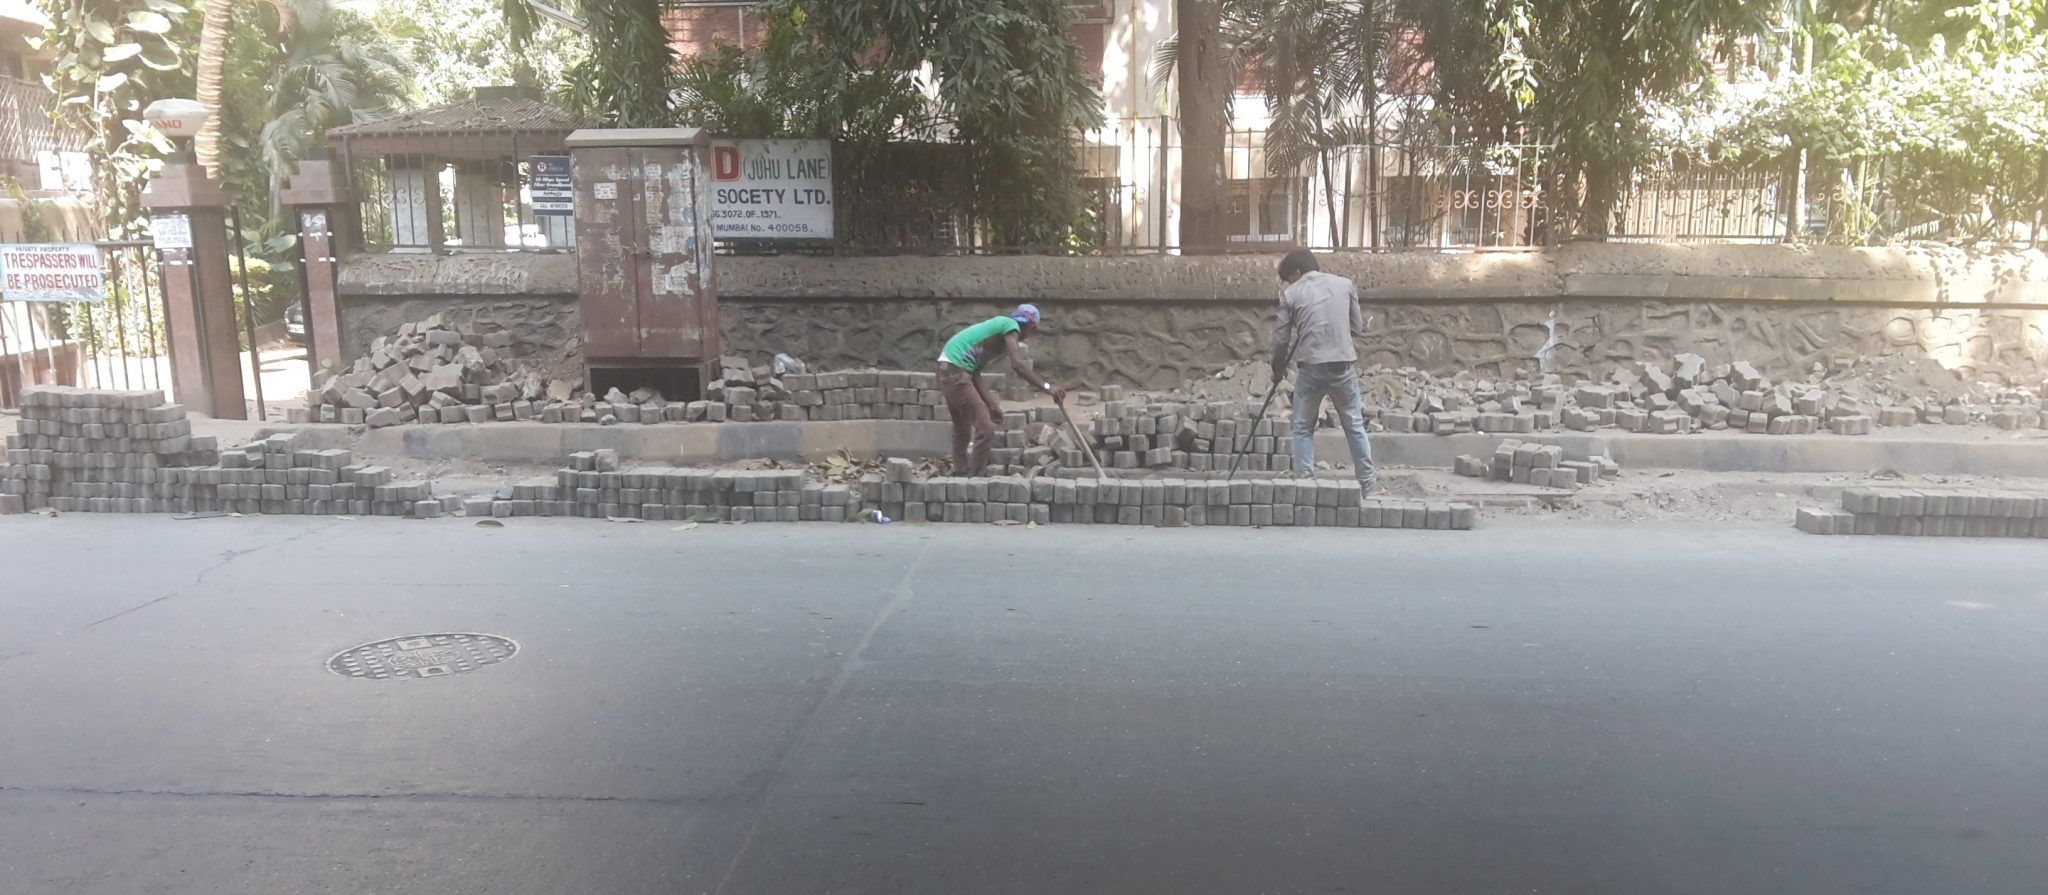 Paver blocks may be disappearing from Mumbai roads, but they aren't gone for good 1